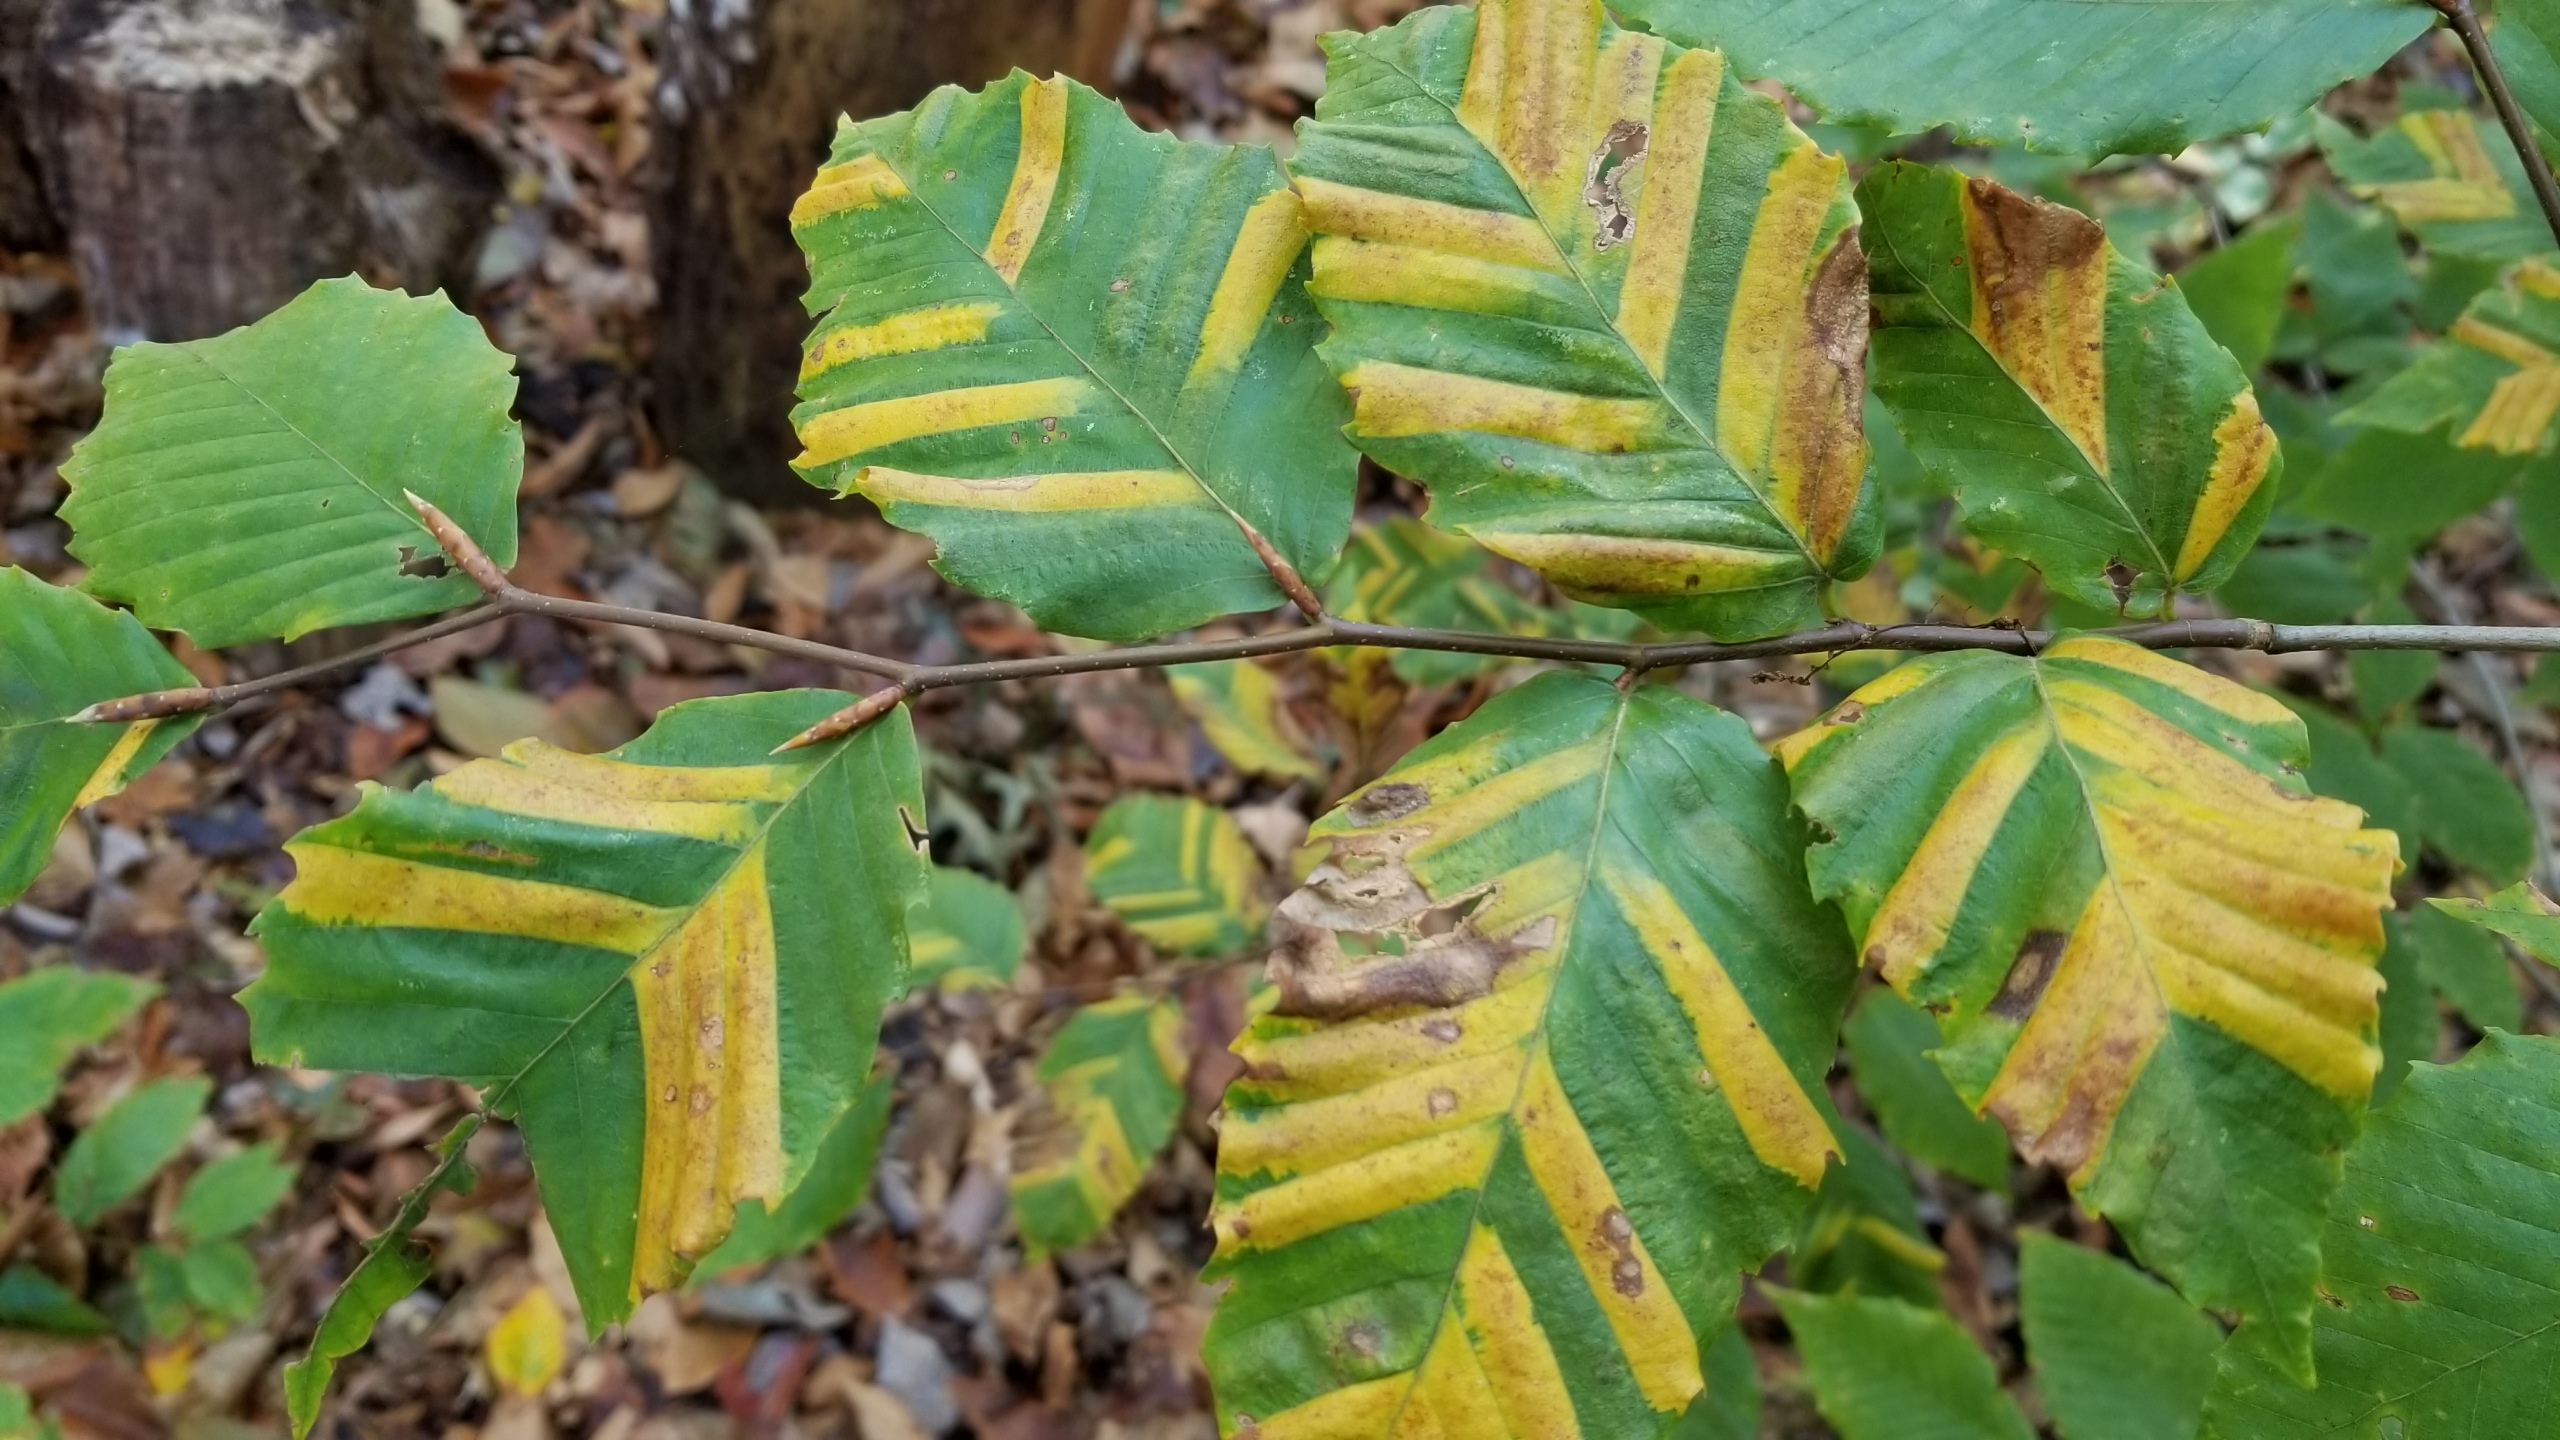 Looking down at several leaves on a branch, mostly green with bright yellow bands.